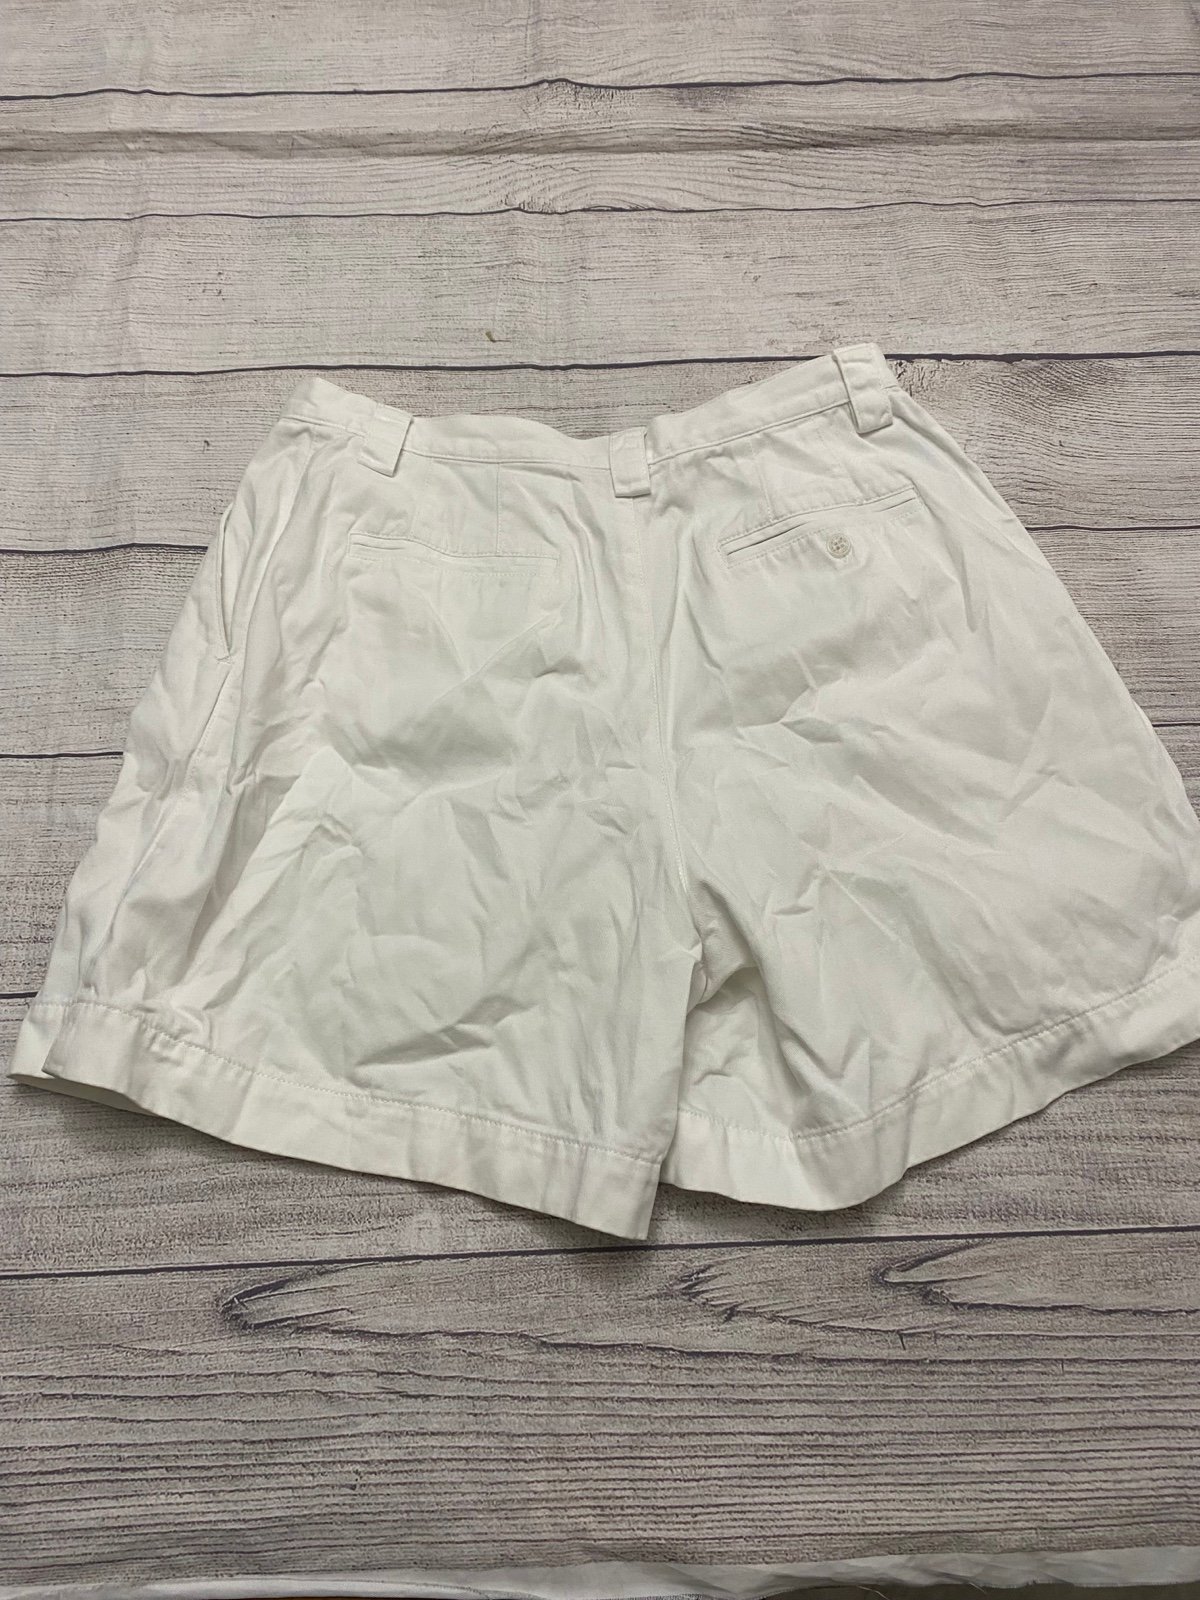 the Lowest price Kate Hill Womens Casual Shorts White Size 6 NW2kPHHgq Novel 